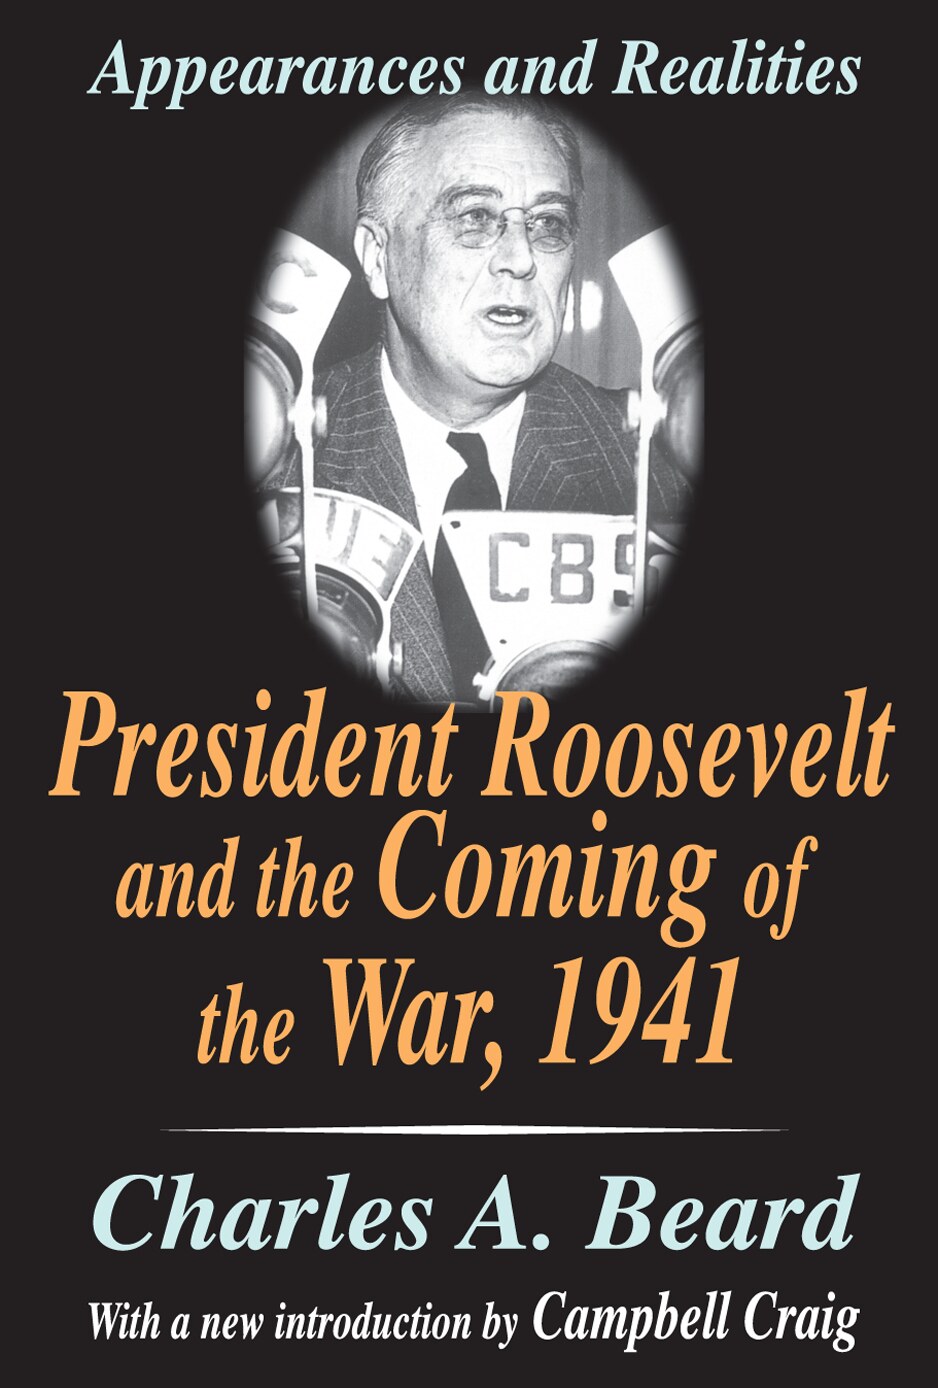 President Roosevelt and the Coming of the War